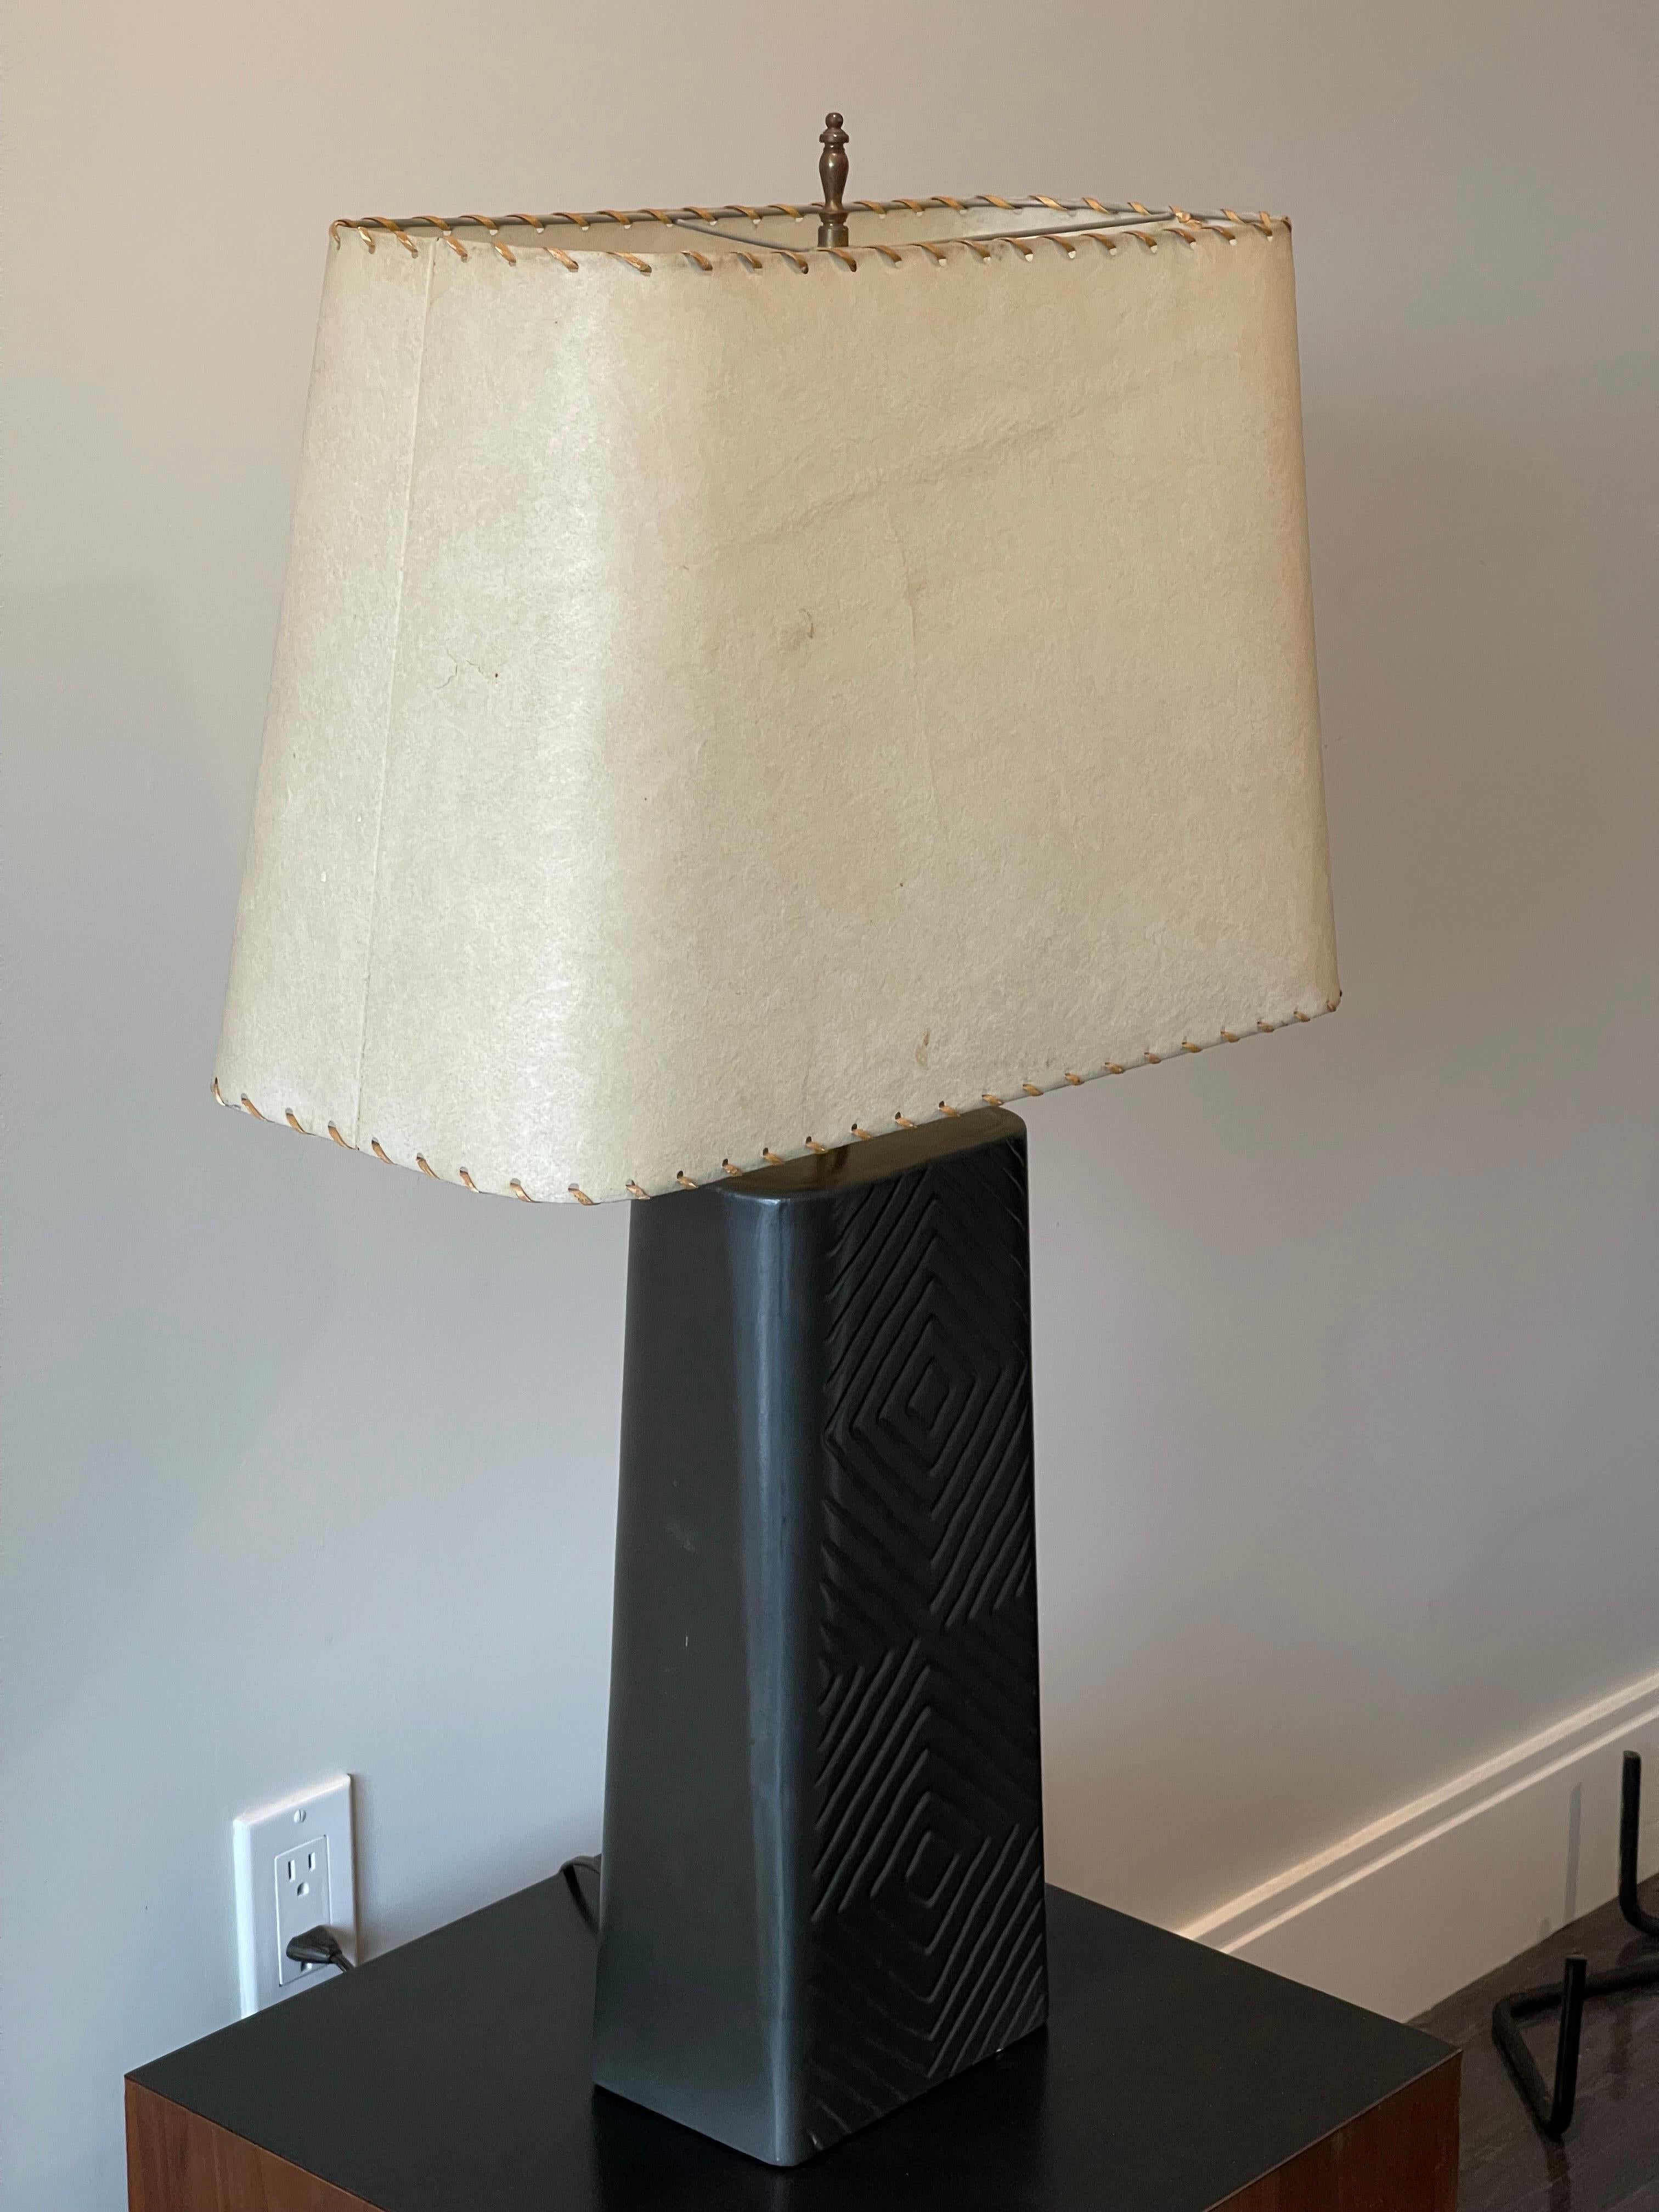 Lovely Large Incised Sgraffito Ceramic Mid-Century Modern table lamp with the original Fiberglass and leather tied shade. Measures 19